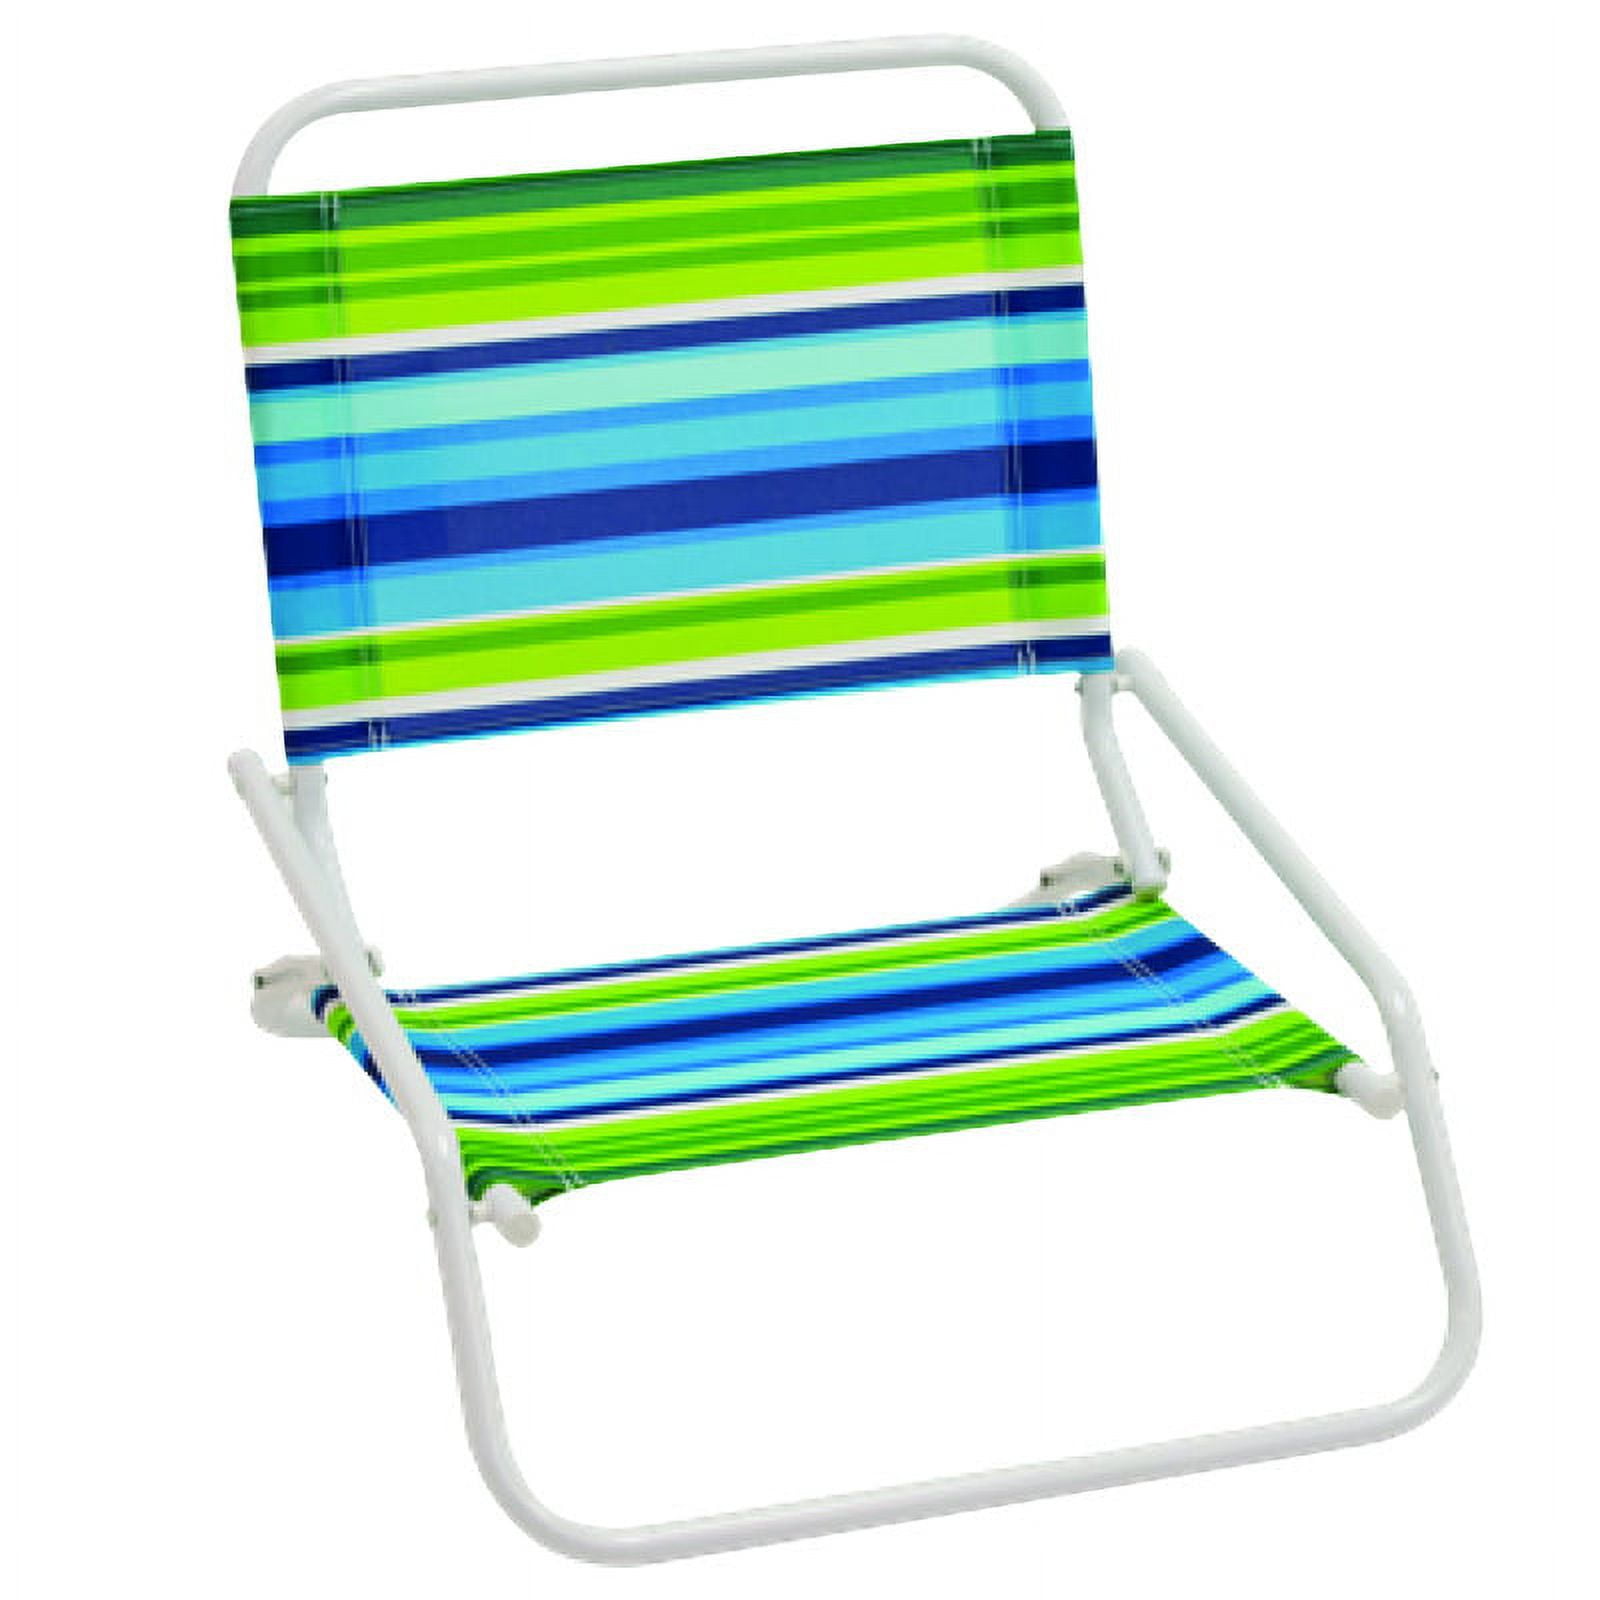 Picture of Rio Brands 8028396 1 Position Multi-color Beach Folding Chair, Pack of 8